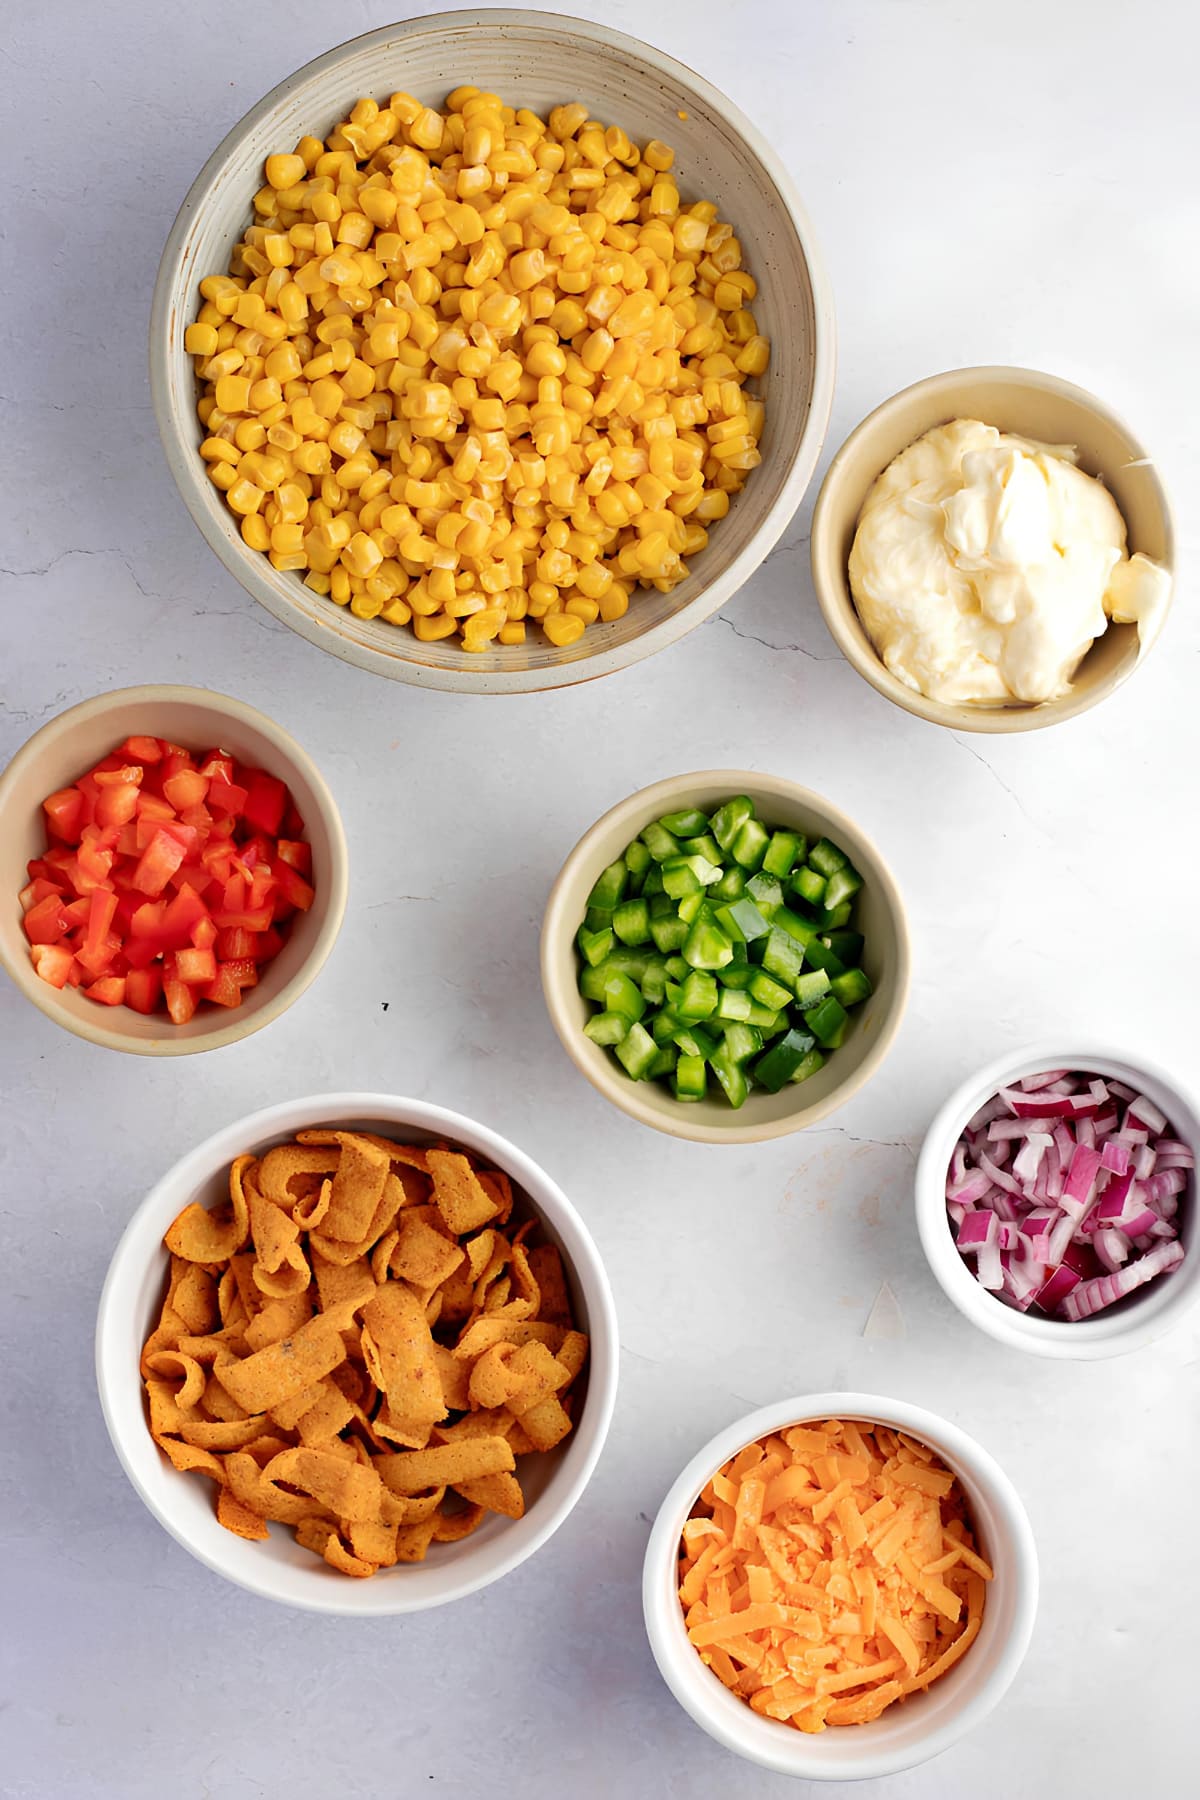 Colorful bowls of various frito corn ingredients